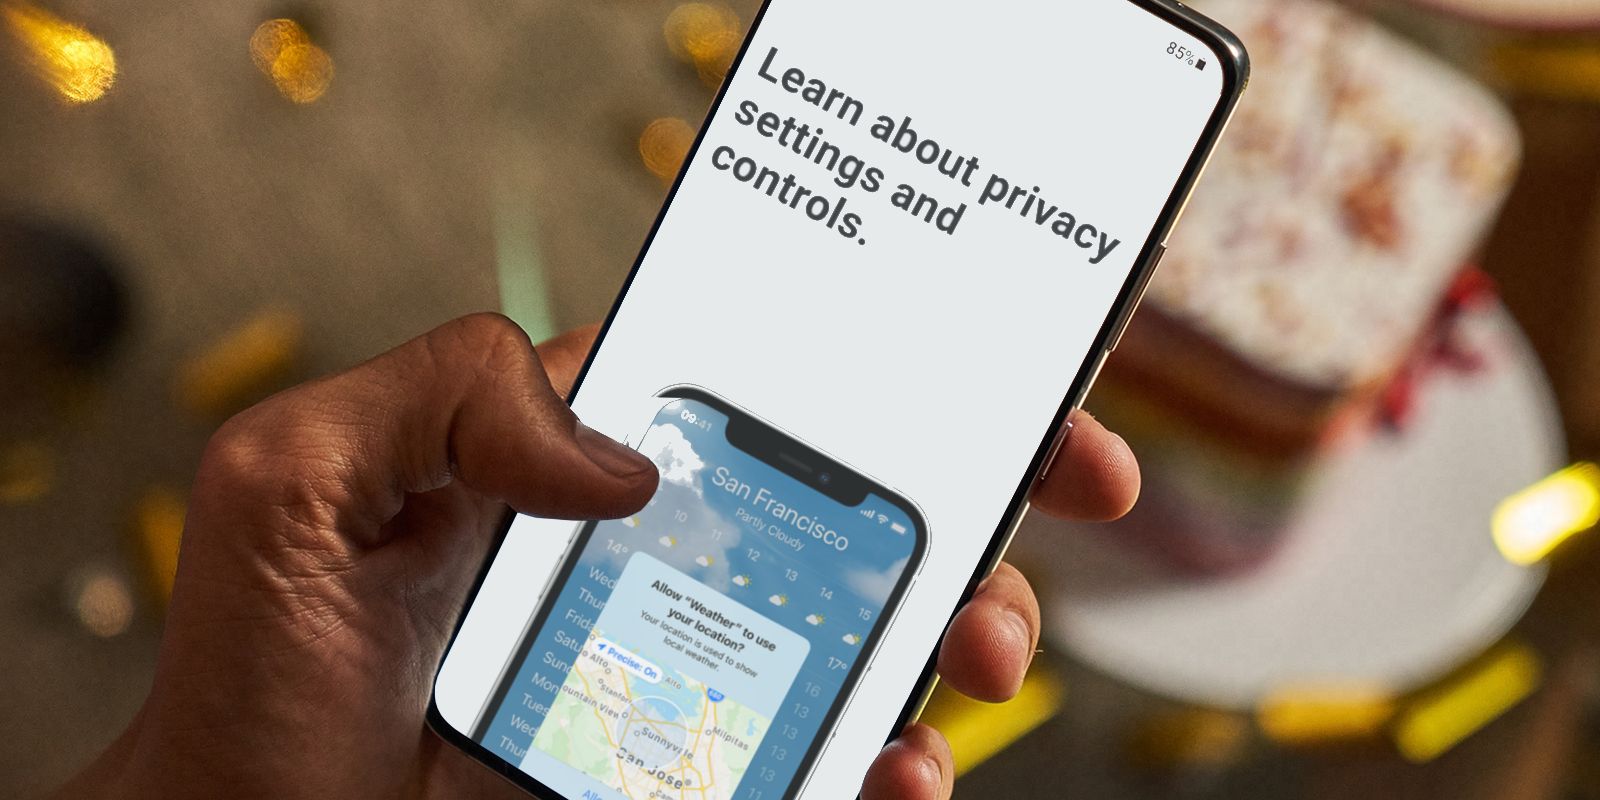 iPhone privacy info on a Samsung Galaxy smartphone